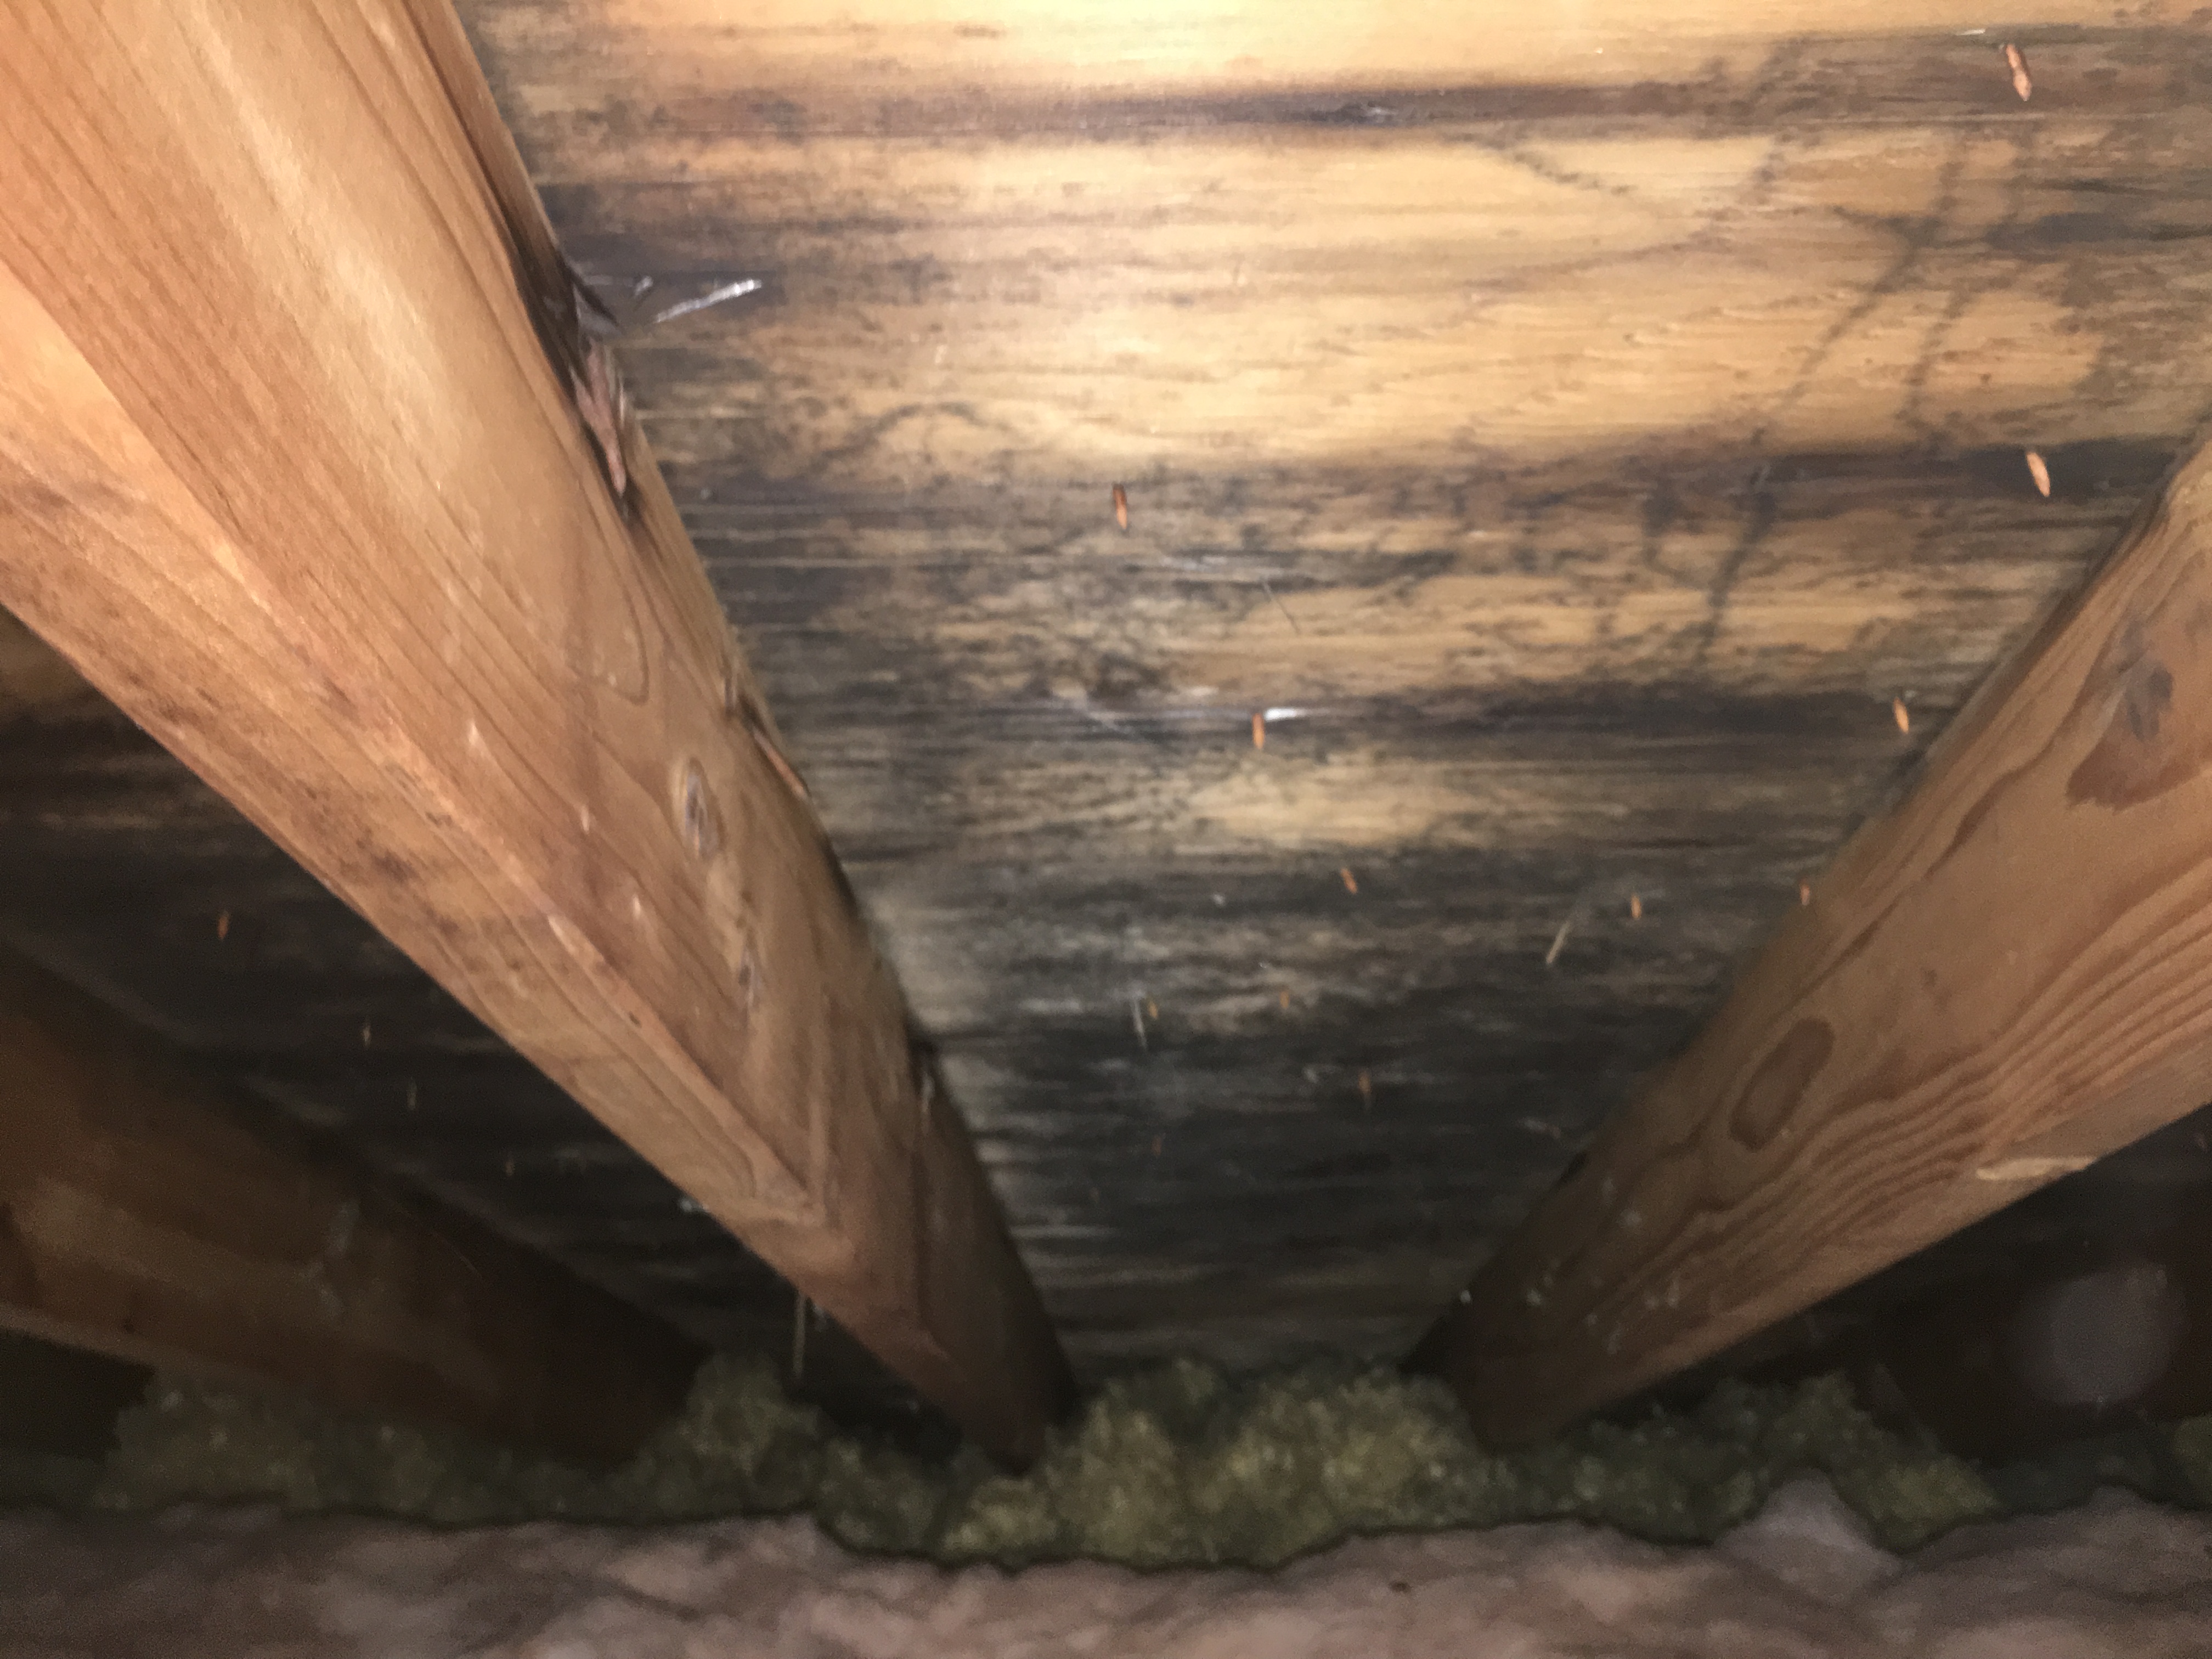 Attic Mold or a "Mold Like Substance?" Mold Removal Illinois & Northwest Indiana